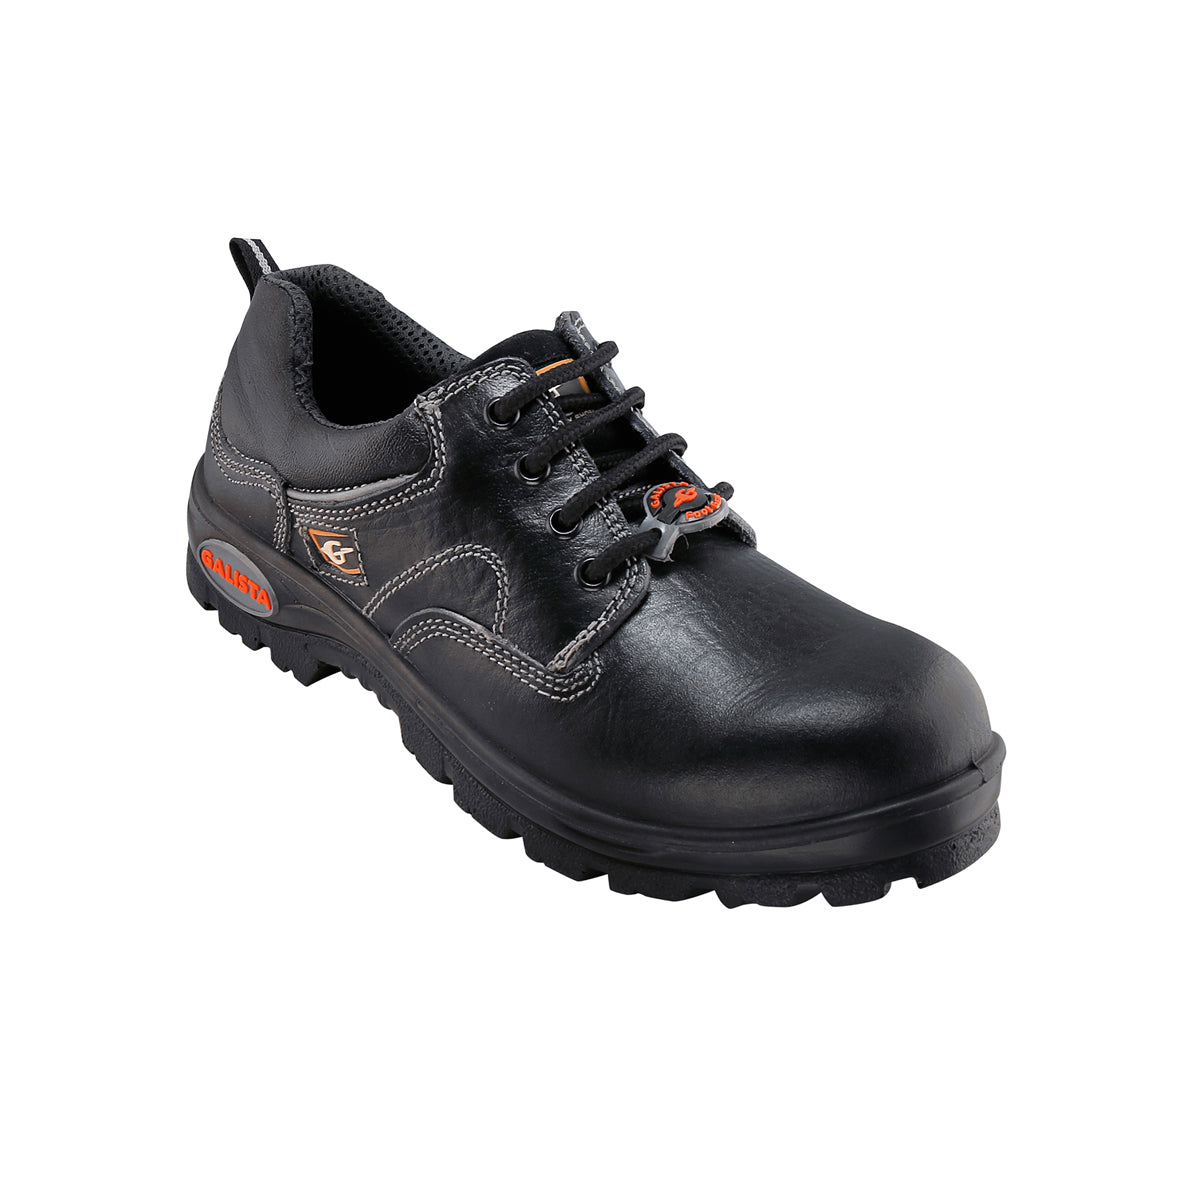 galista safety shoes